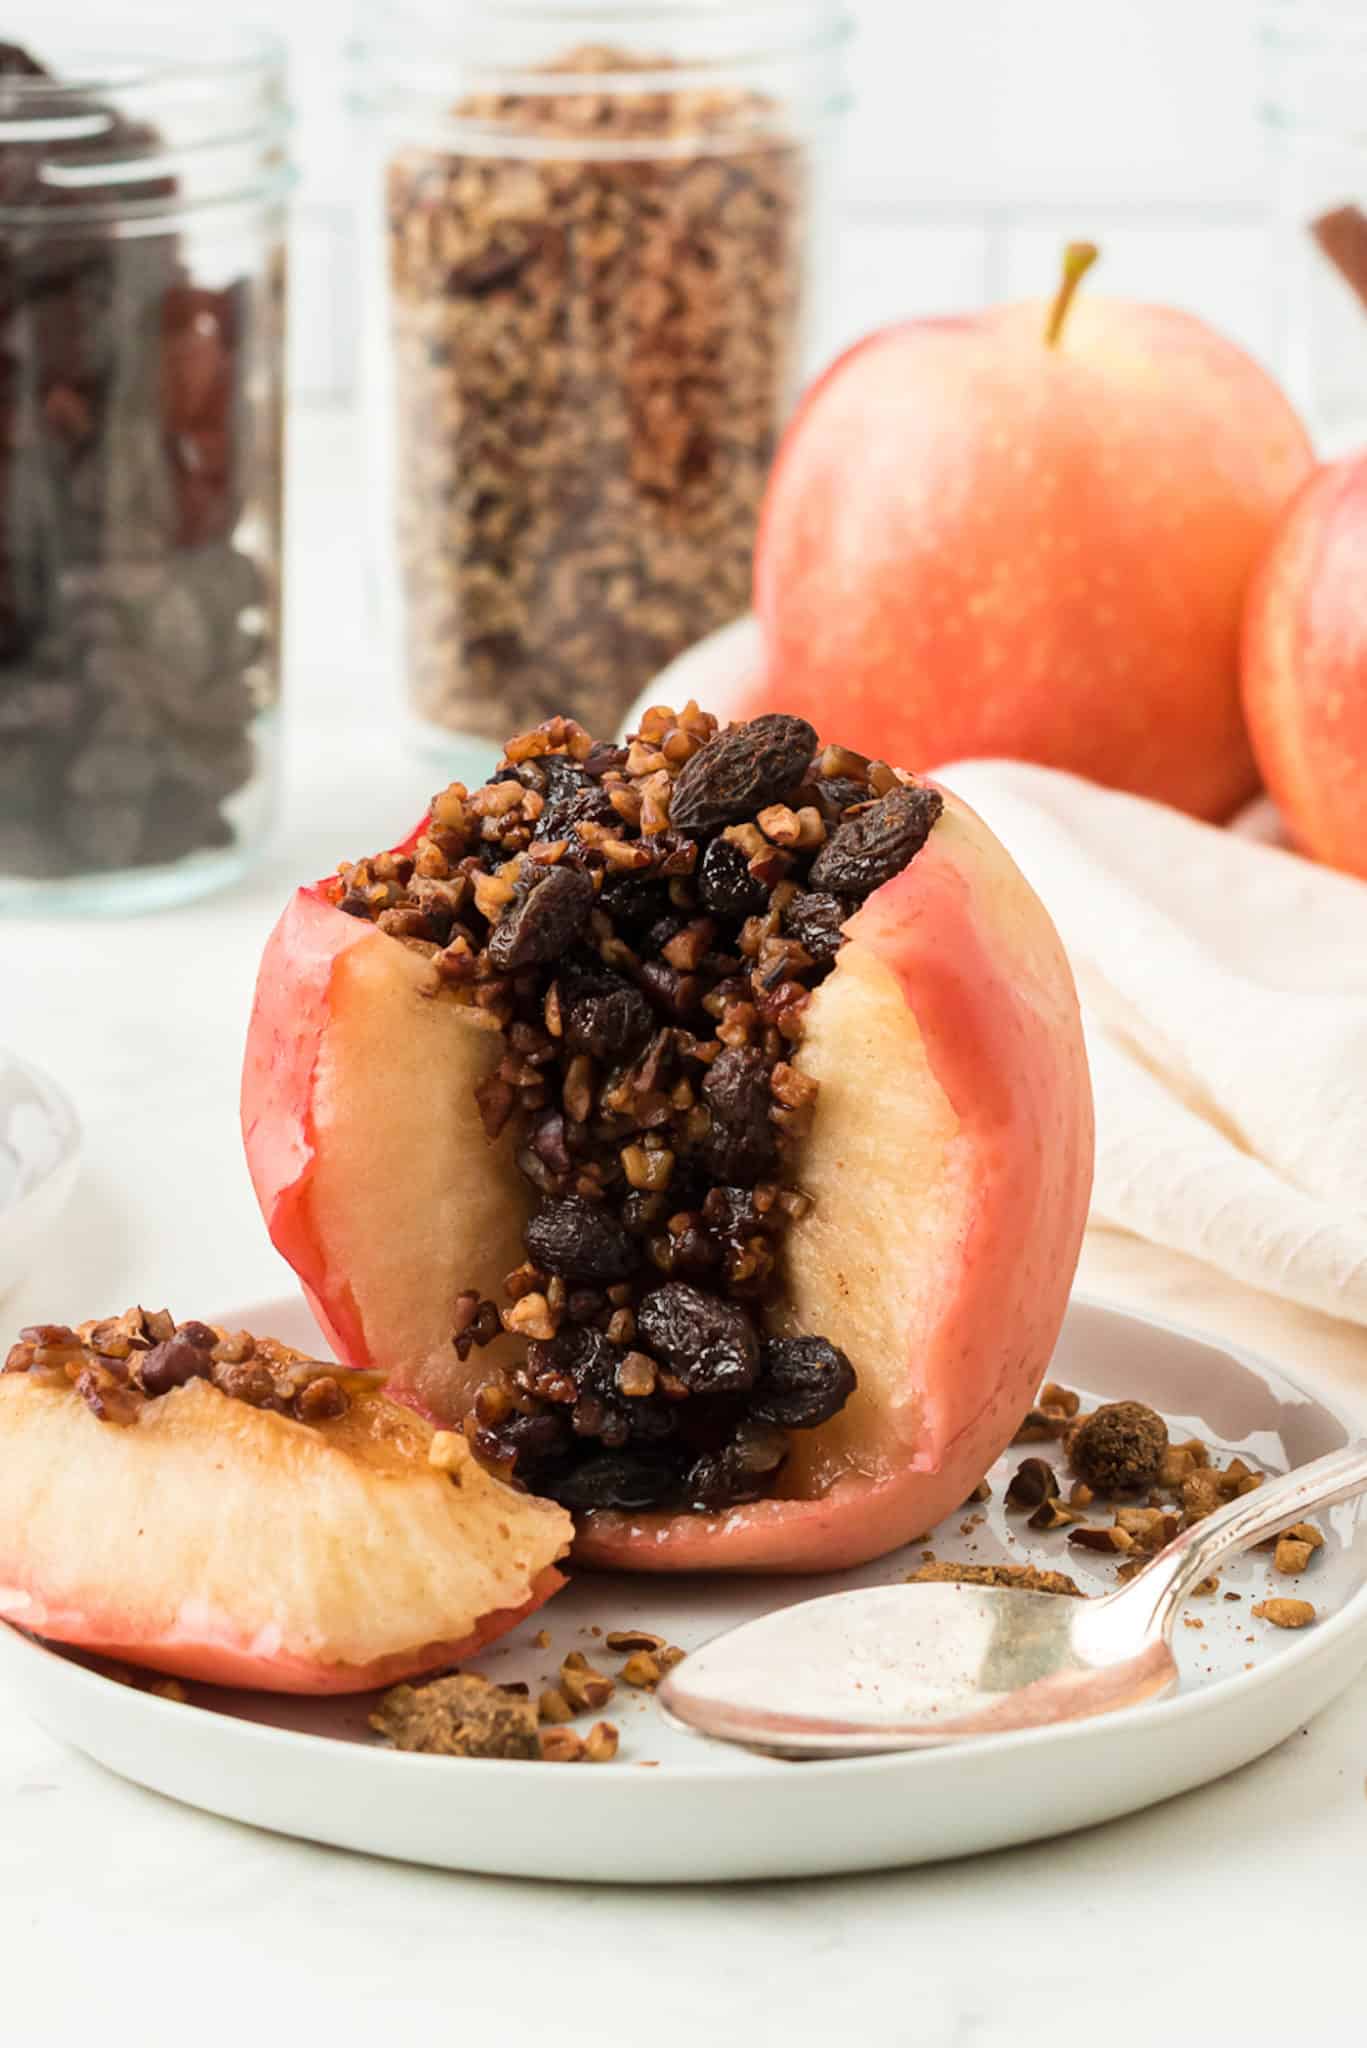 instant pot baked apple with raisin filling.